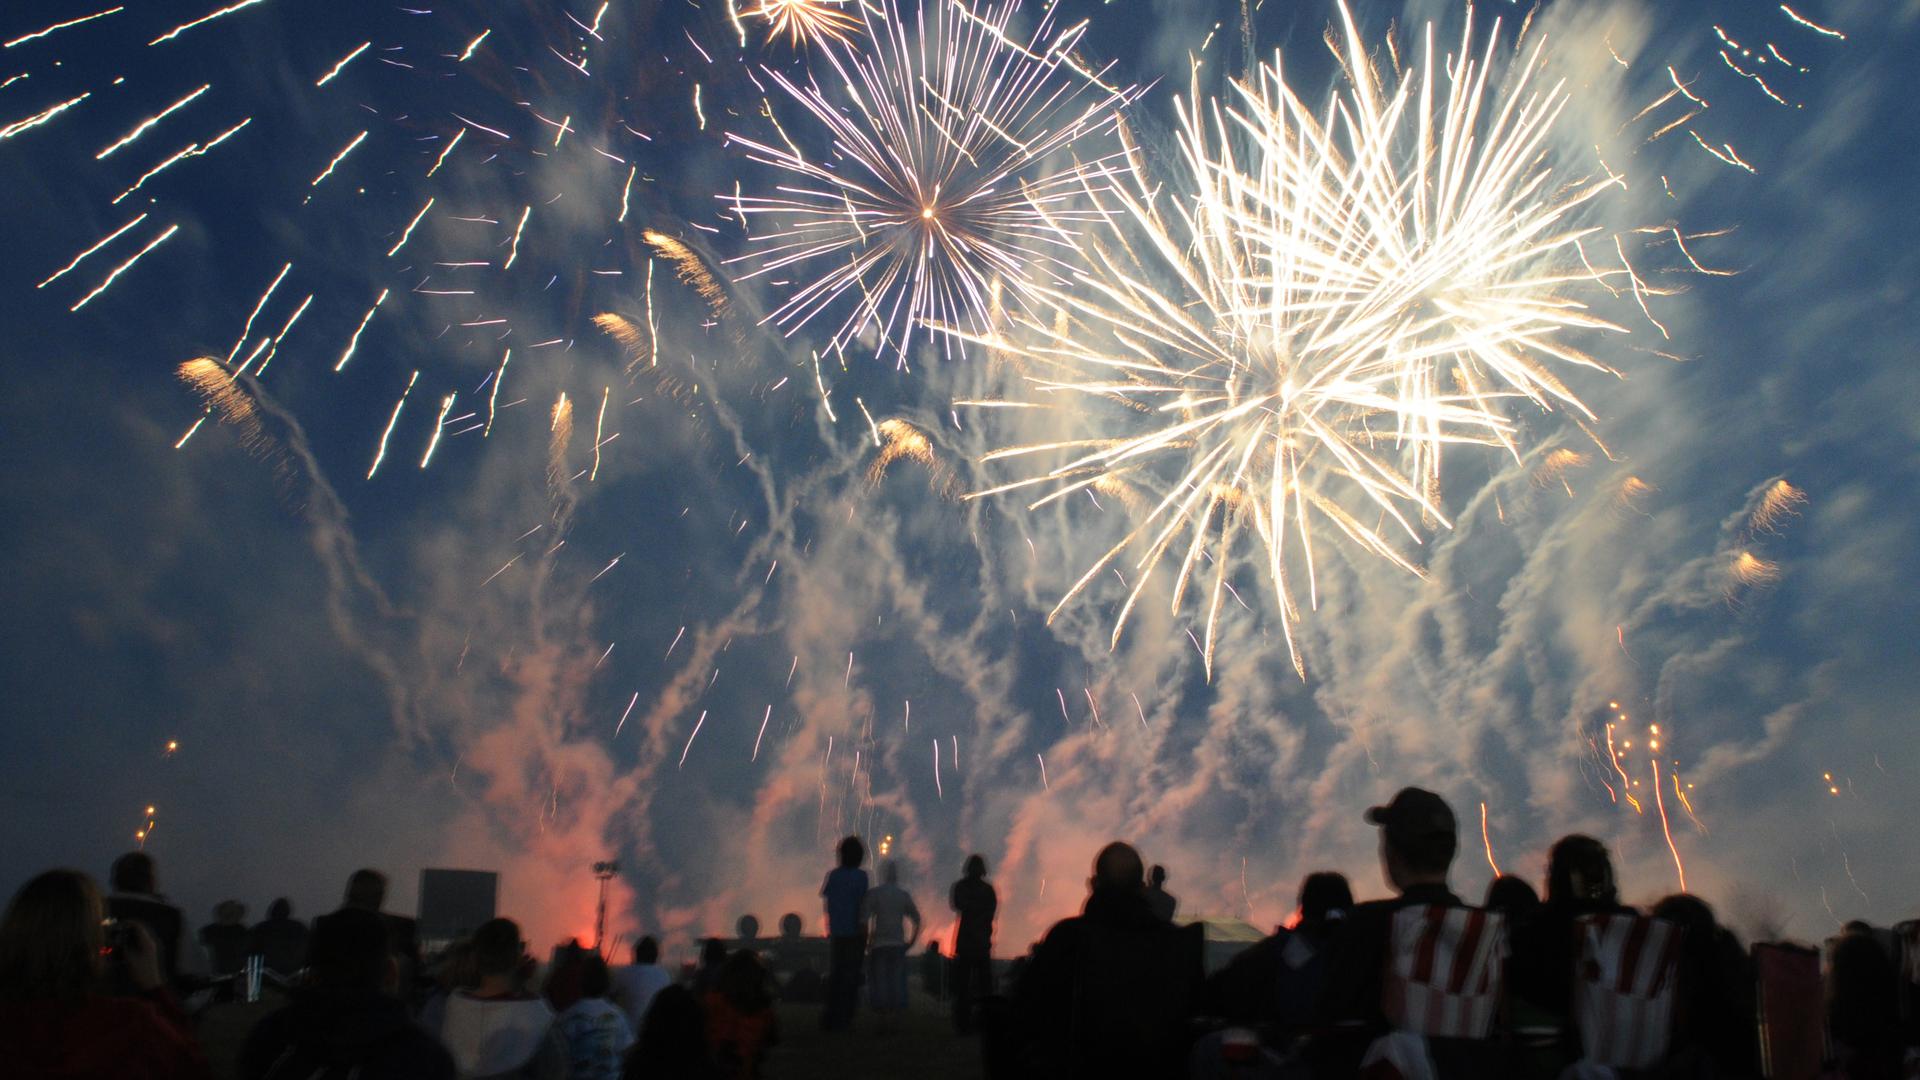 Fireworks light up the evening sky above RAF Feltwell during the annual 4th of July celebration. The festivities included games, rides, contests and food booths.